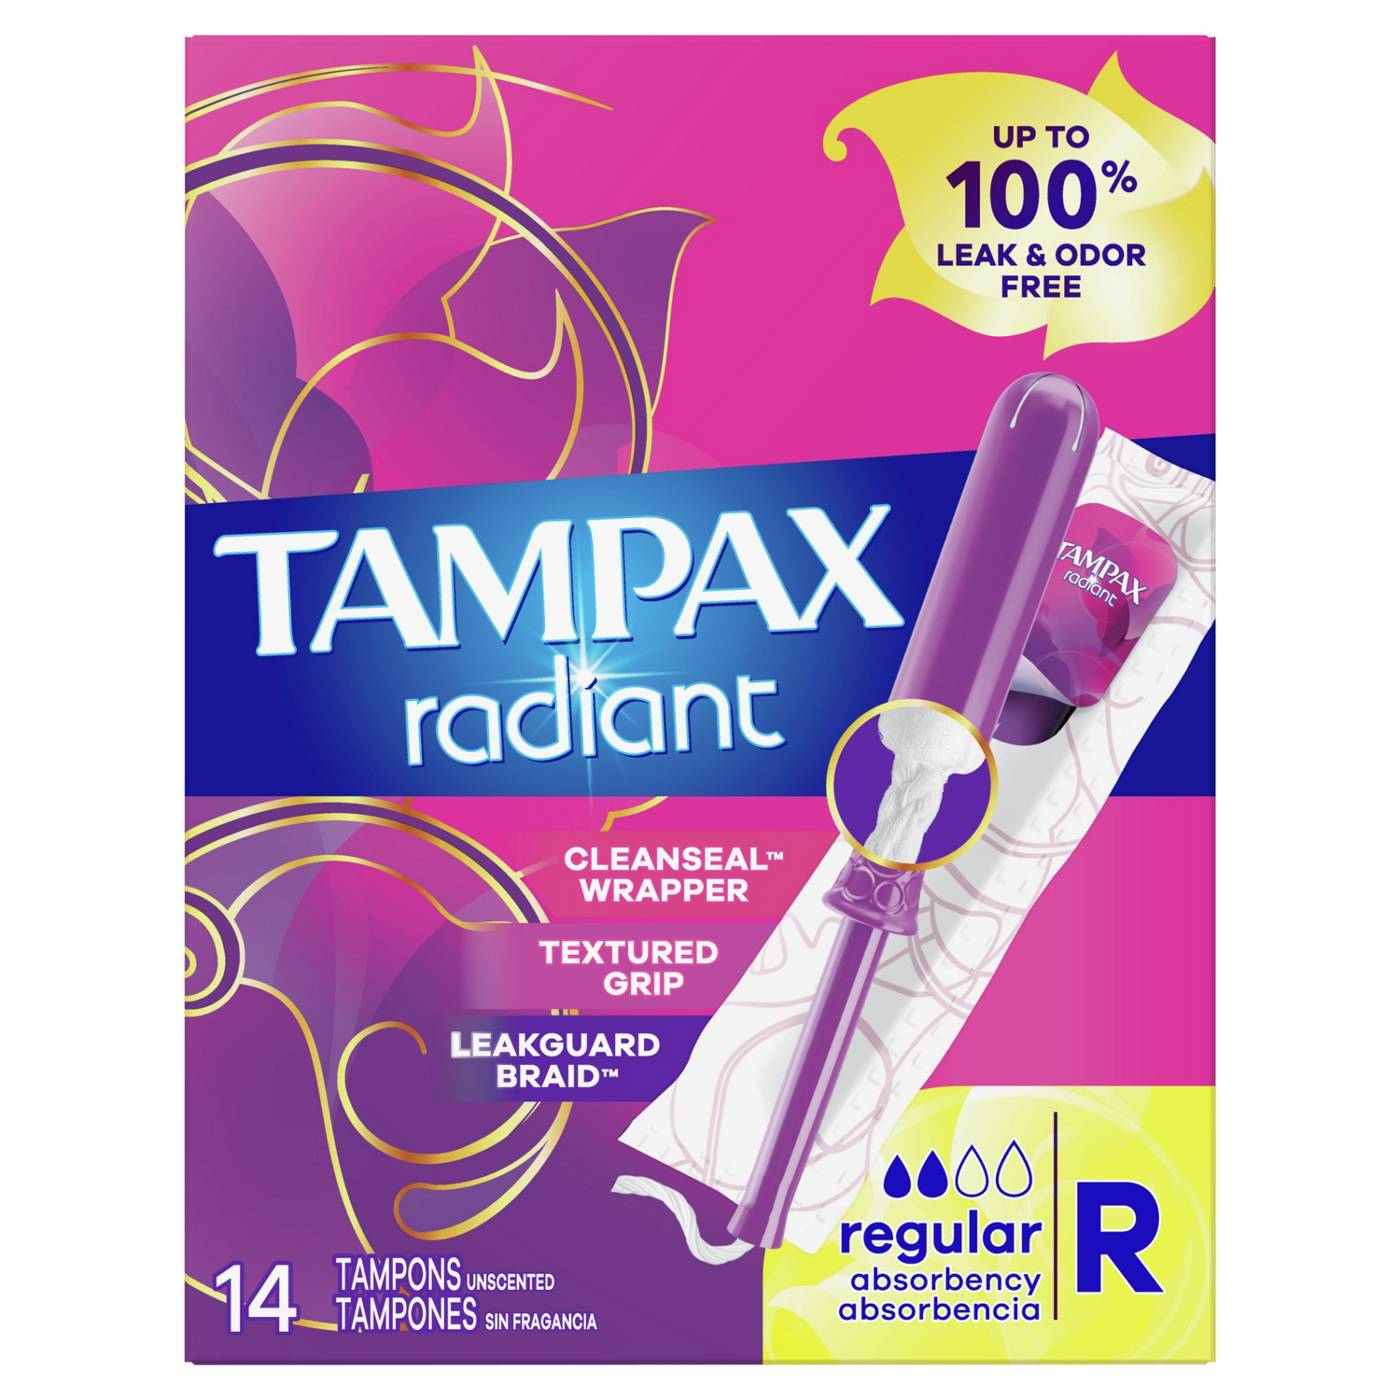 Tampax Radiant Tampons Regular Absorbency, Unscented; image 1 of 7